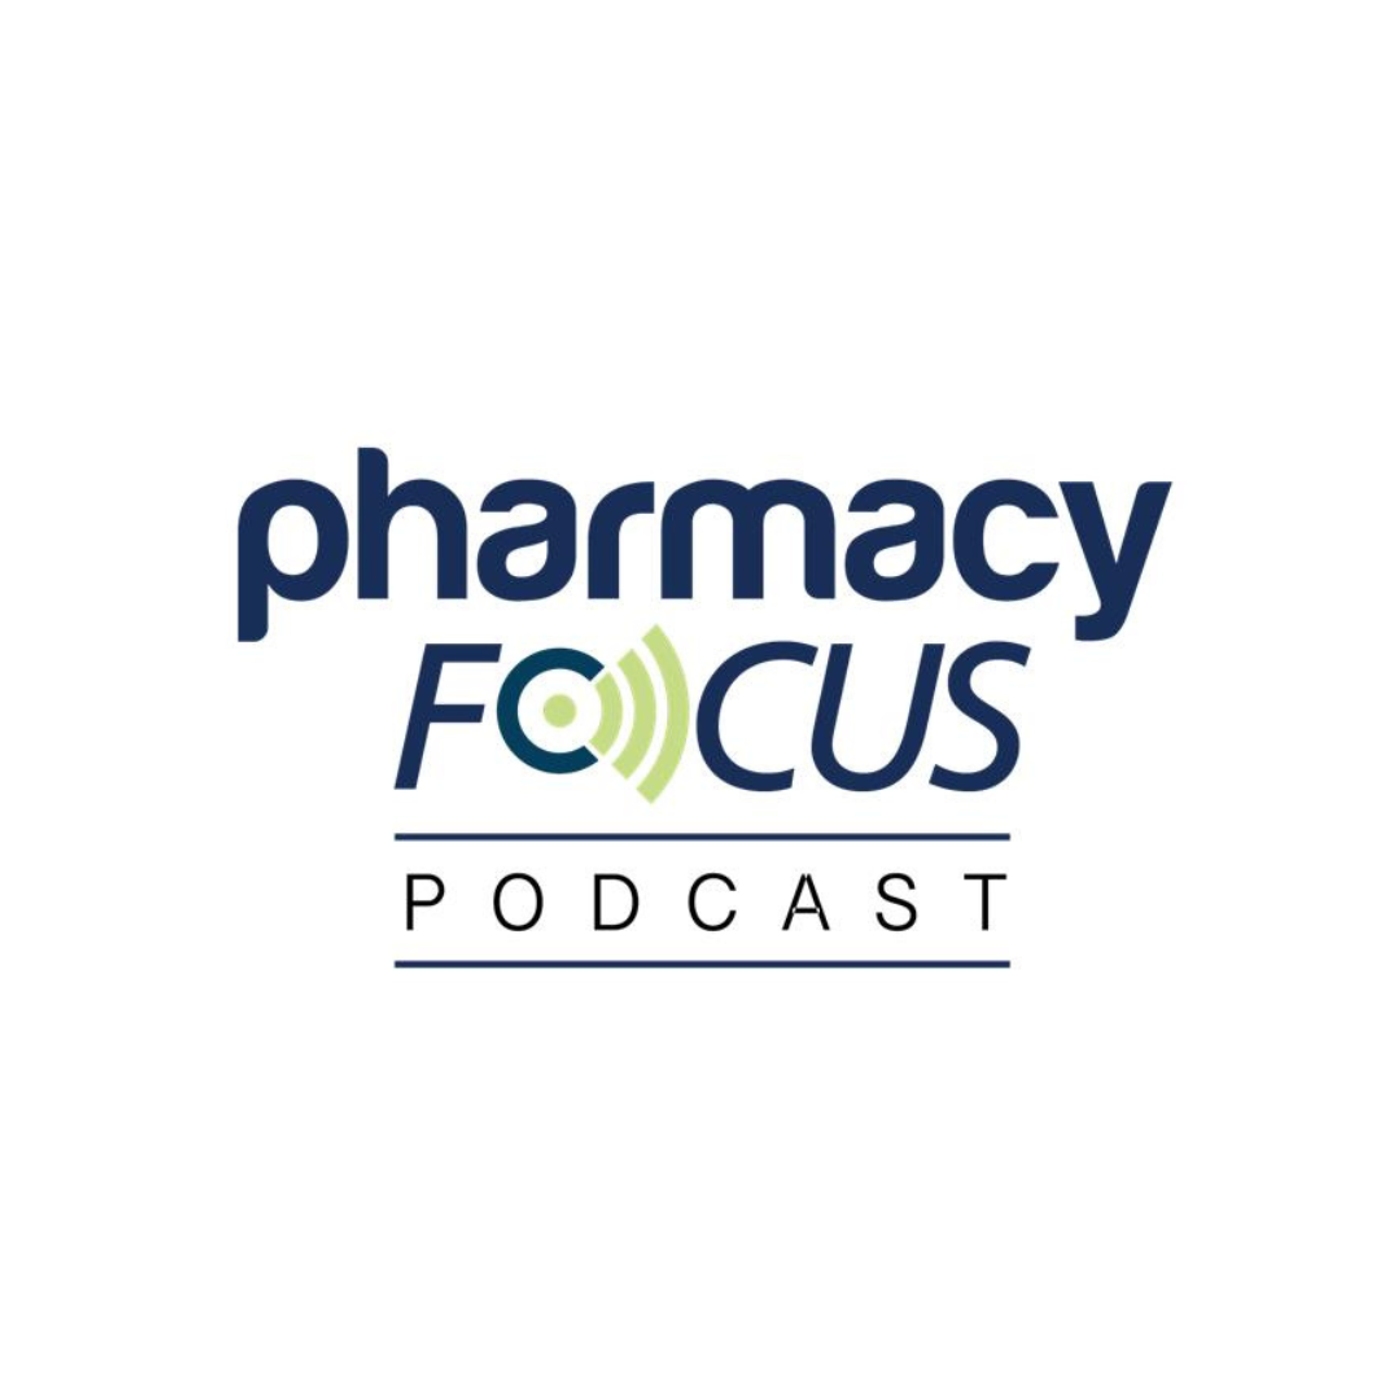 S2 Ep13: Pharmacy Focus: Limited Series - Celebrity Endorsements in Public Health